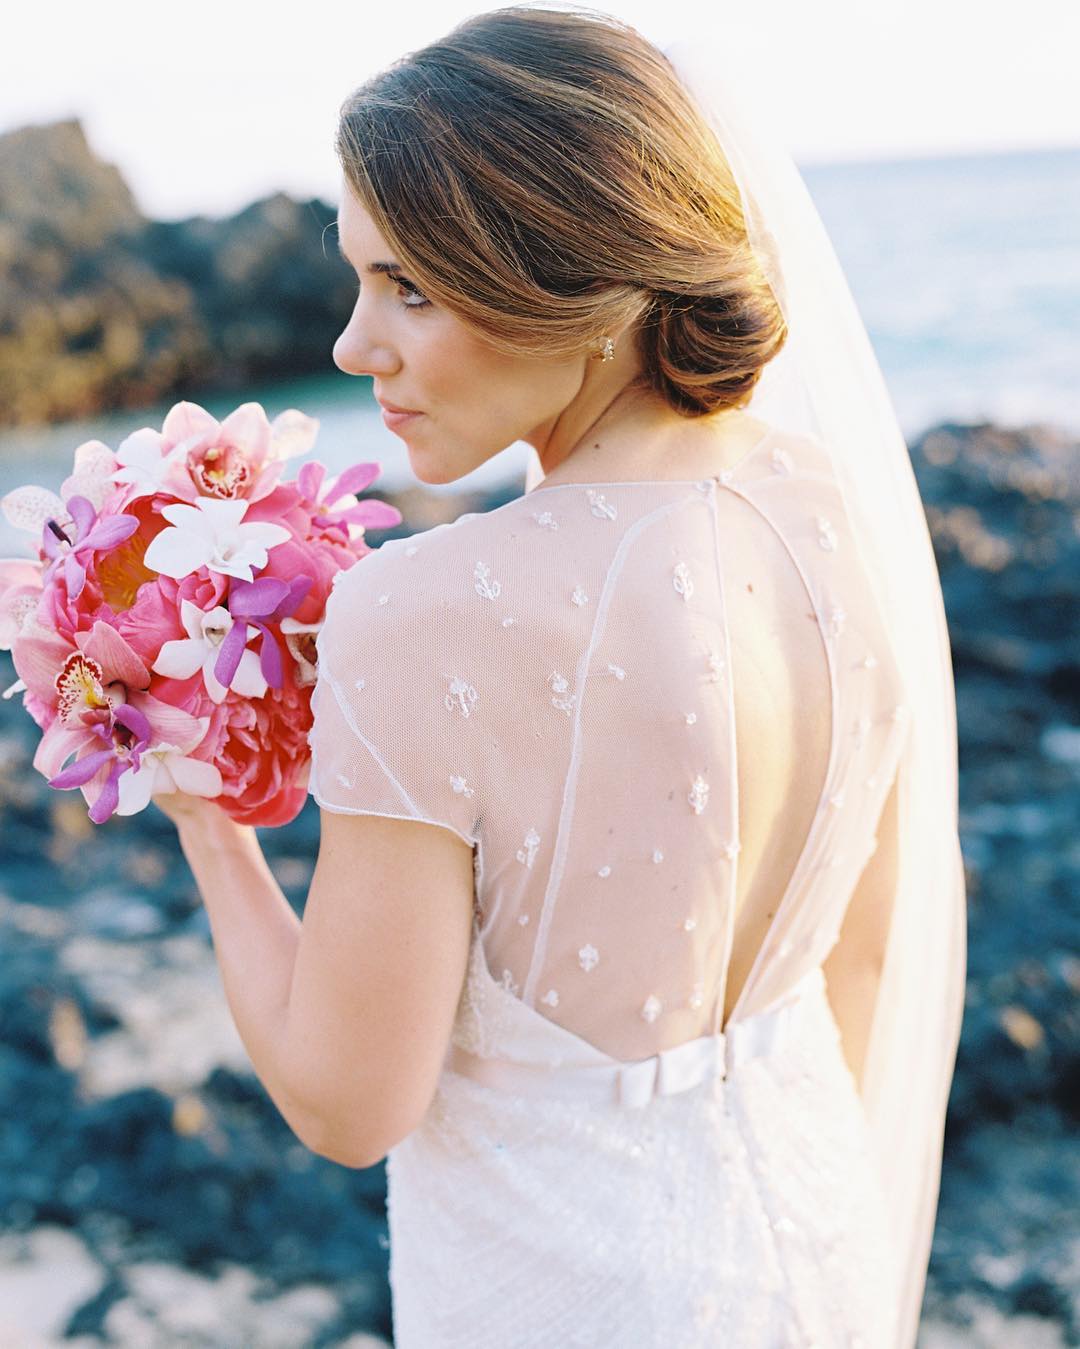 Captivating Beach Wedding Hairstyles Perfect Tresses for Your Dreamy Day